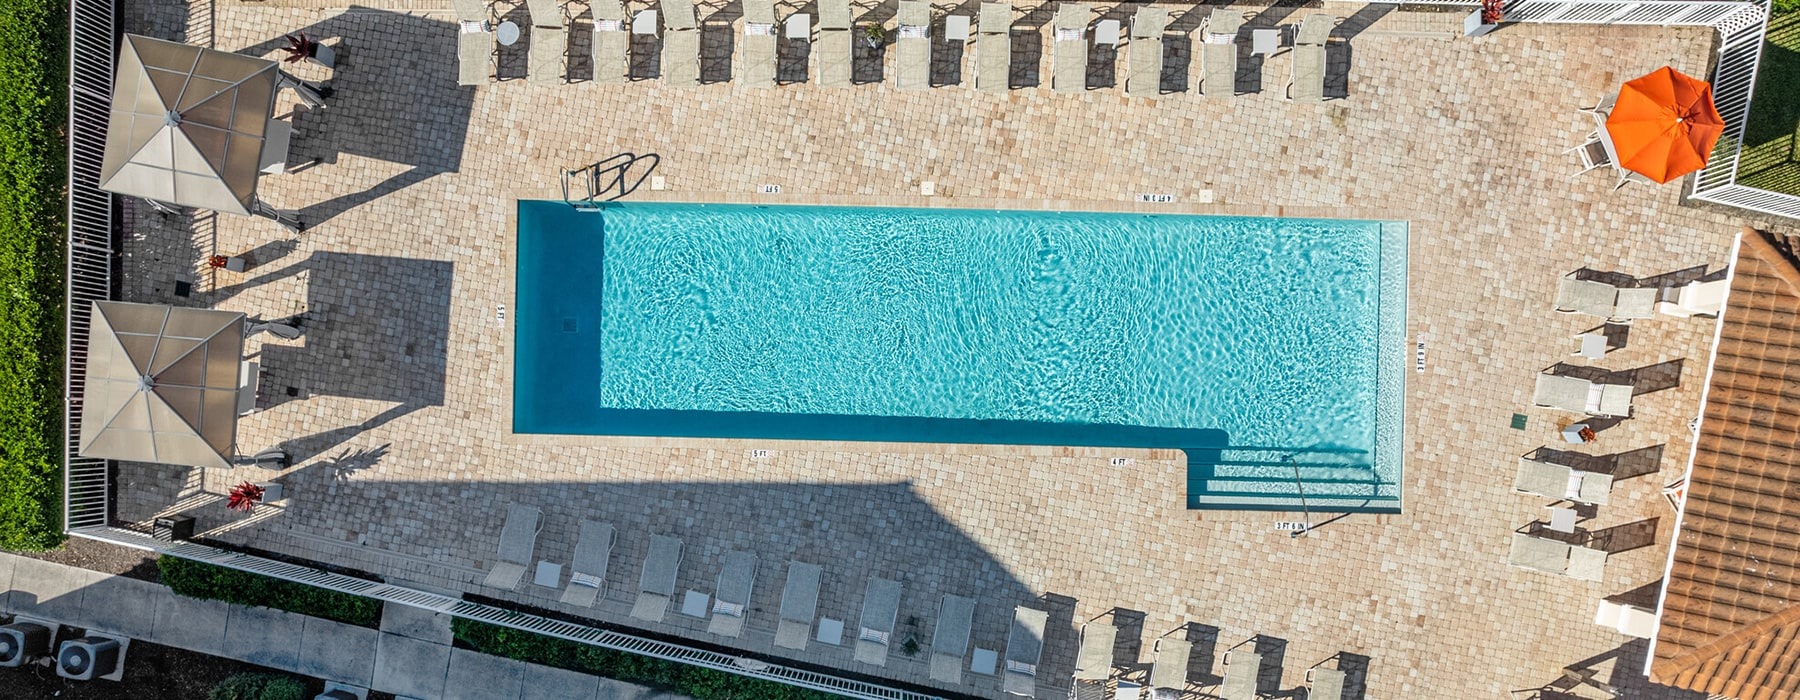 aerial view of pool showing ample reclining seating and modern covered-seating areas